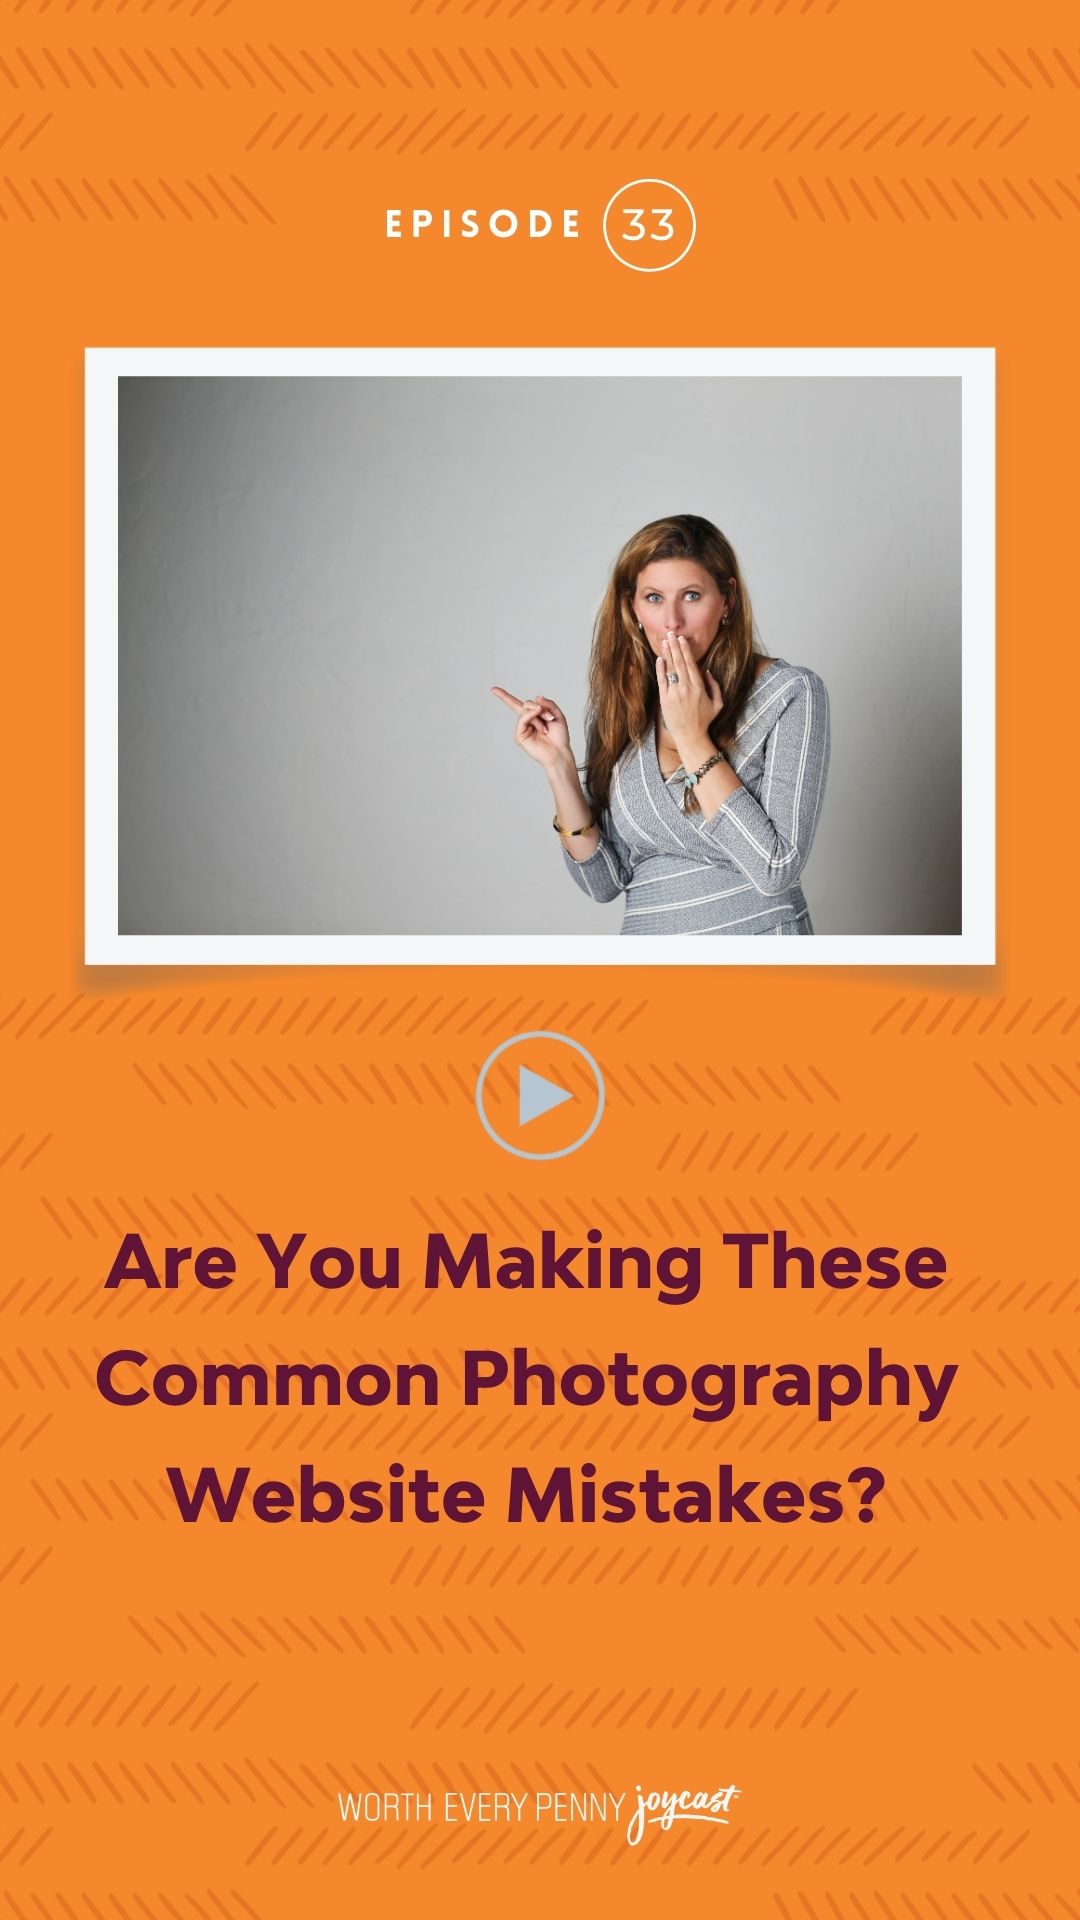 Episode 33: Are You Making these Common Photography Website Mistakes?